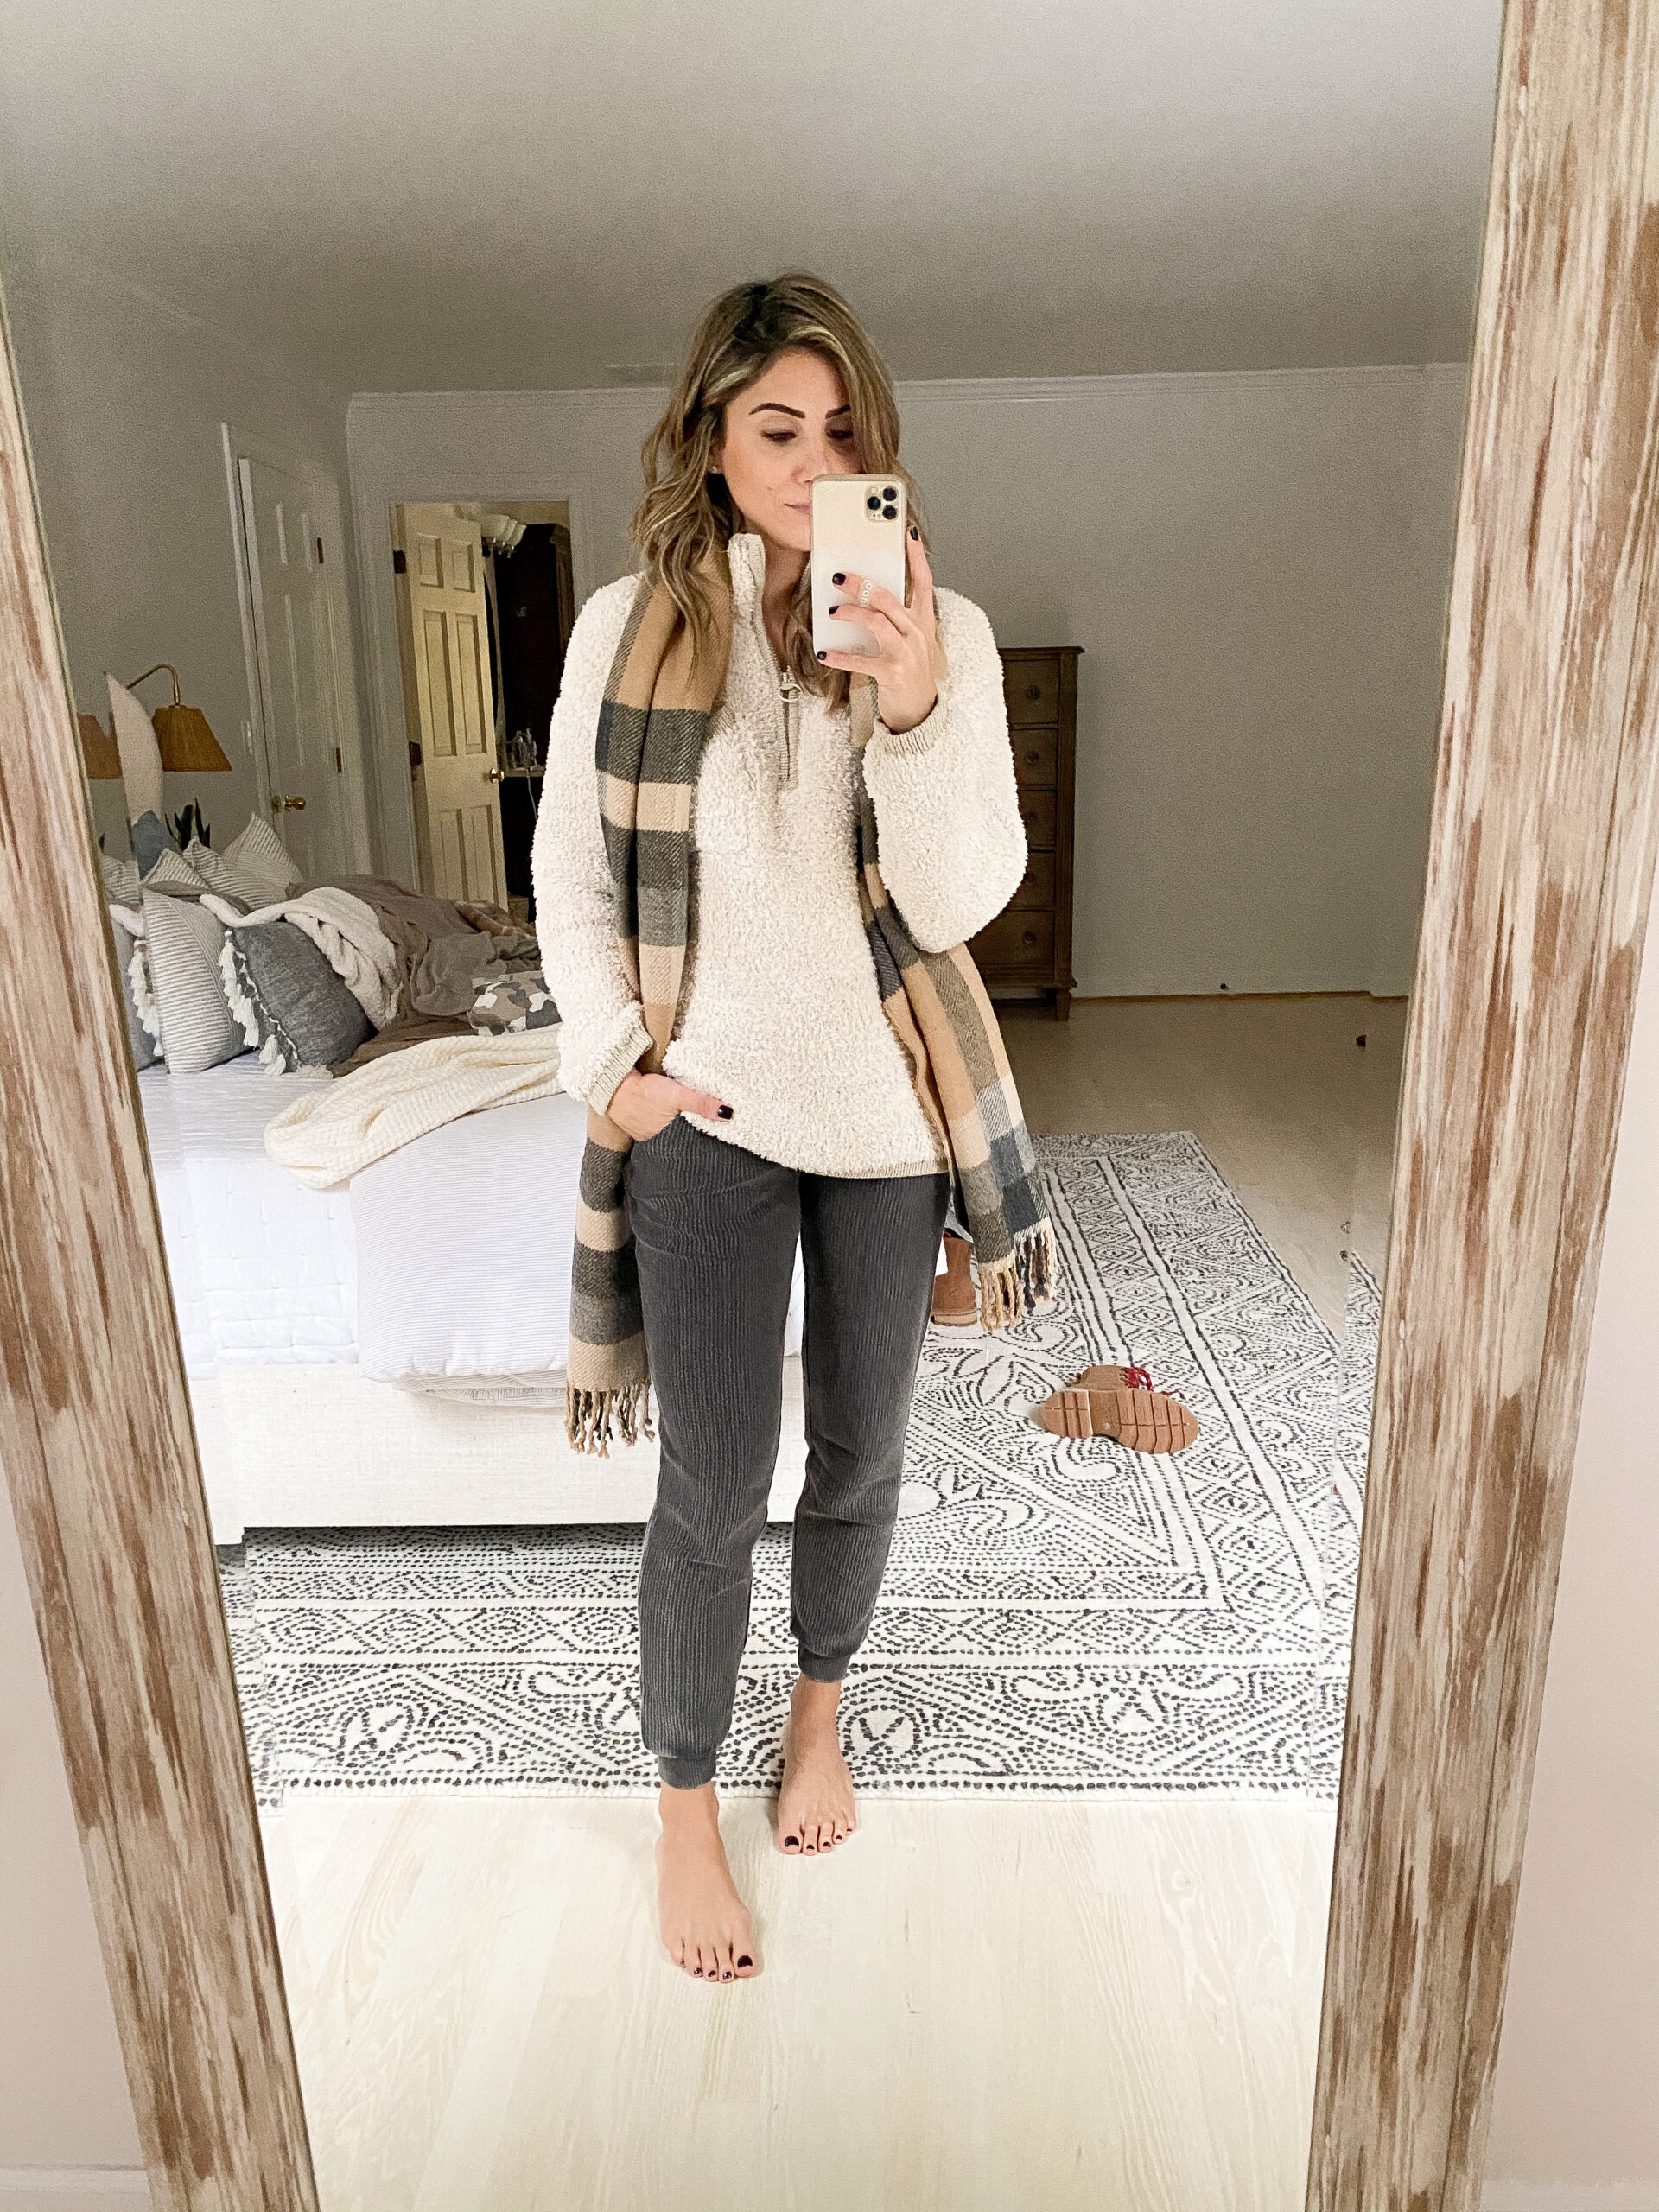 Looking for some cozy options to add to your wardrobe? Connecticut life and style Lauren McBride shares a cozy fall try on.